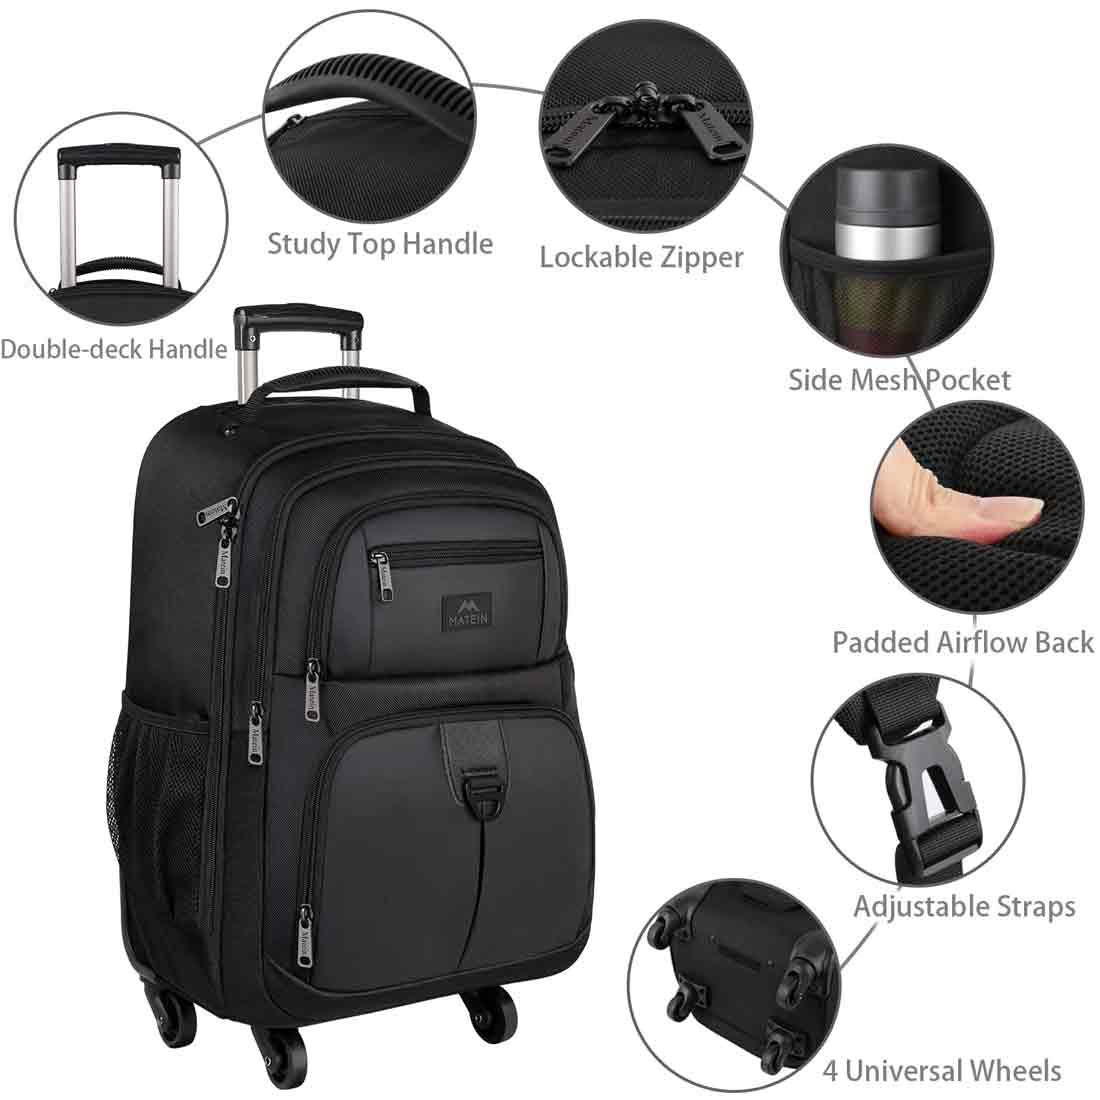 Matein Business Laptop Travel Luggage Wheeled Rolling Backpack - travel laptop backpack